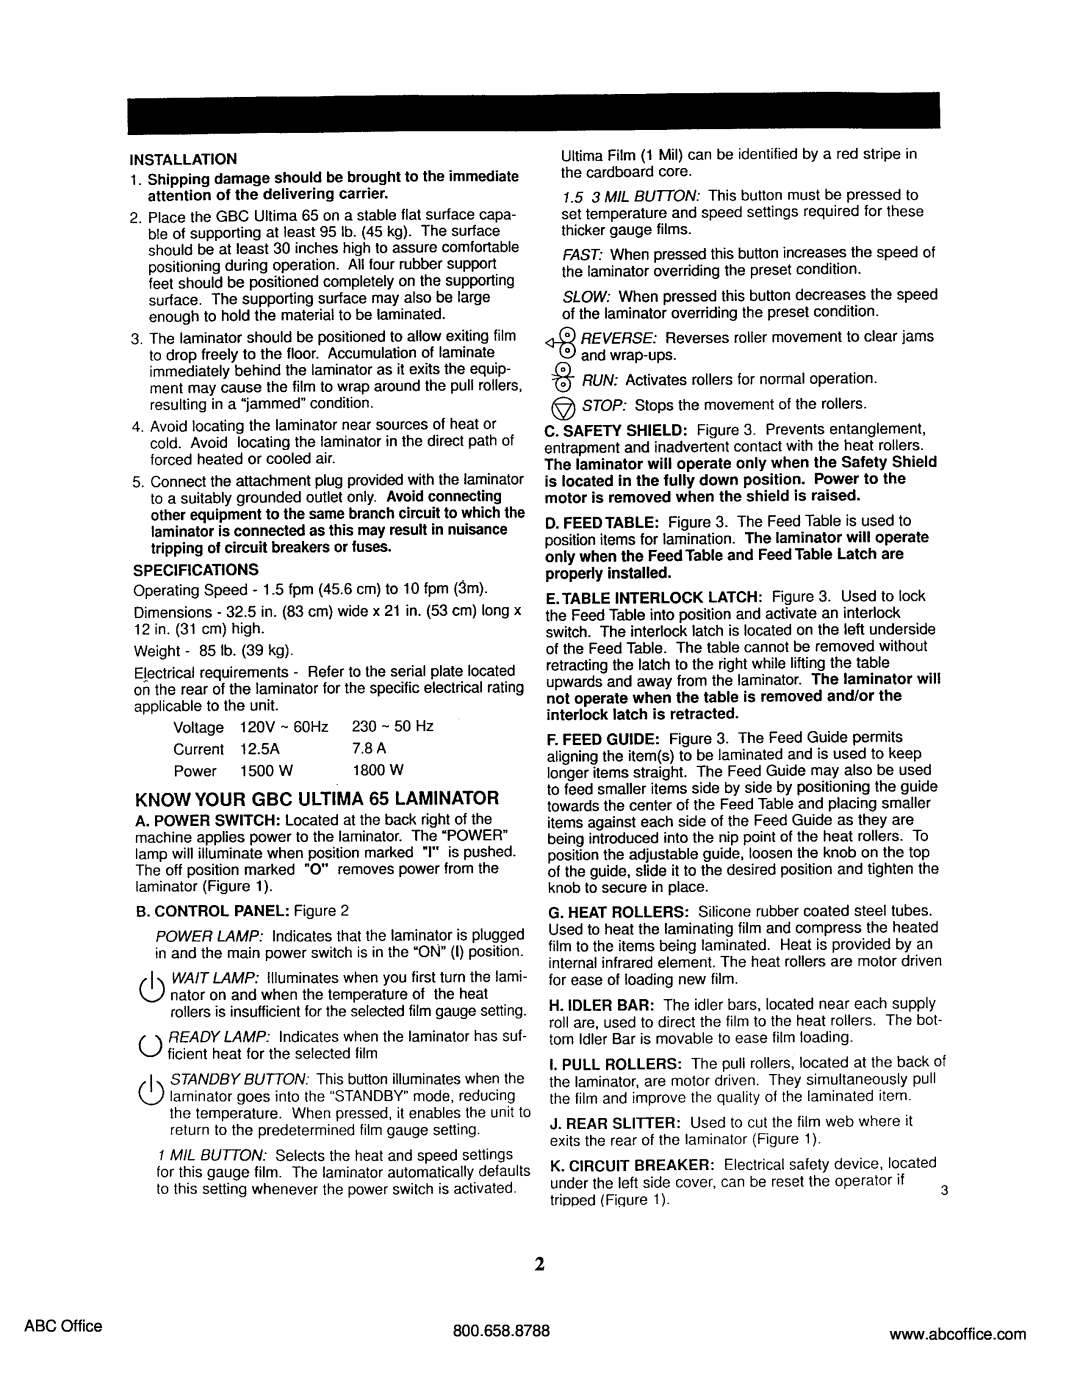 ABC Office ULTIMA 65 operating instructions ABC Office, 800.658.8788 